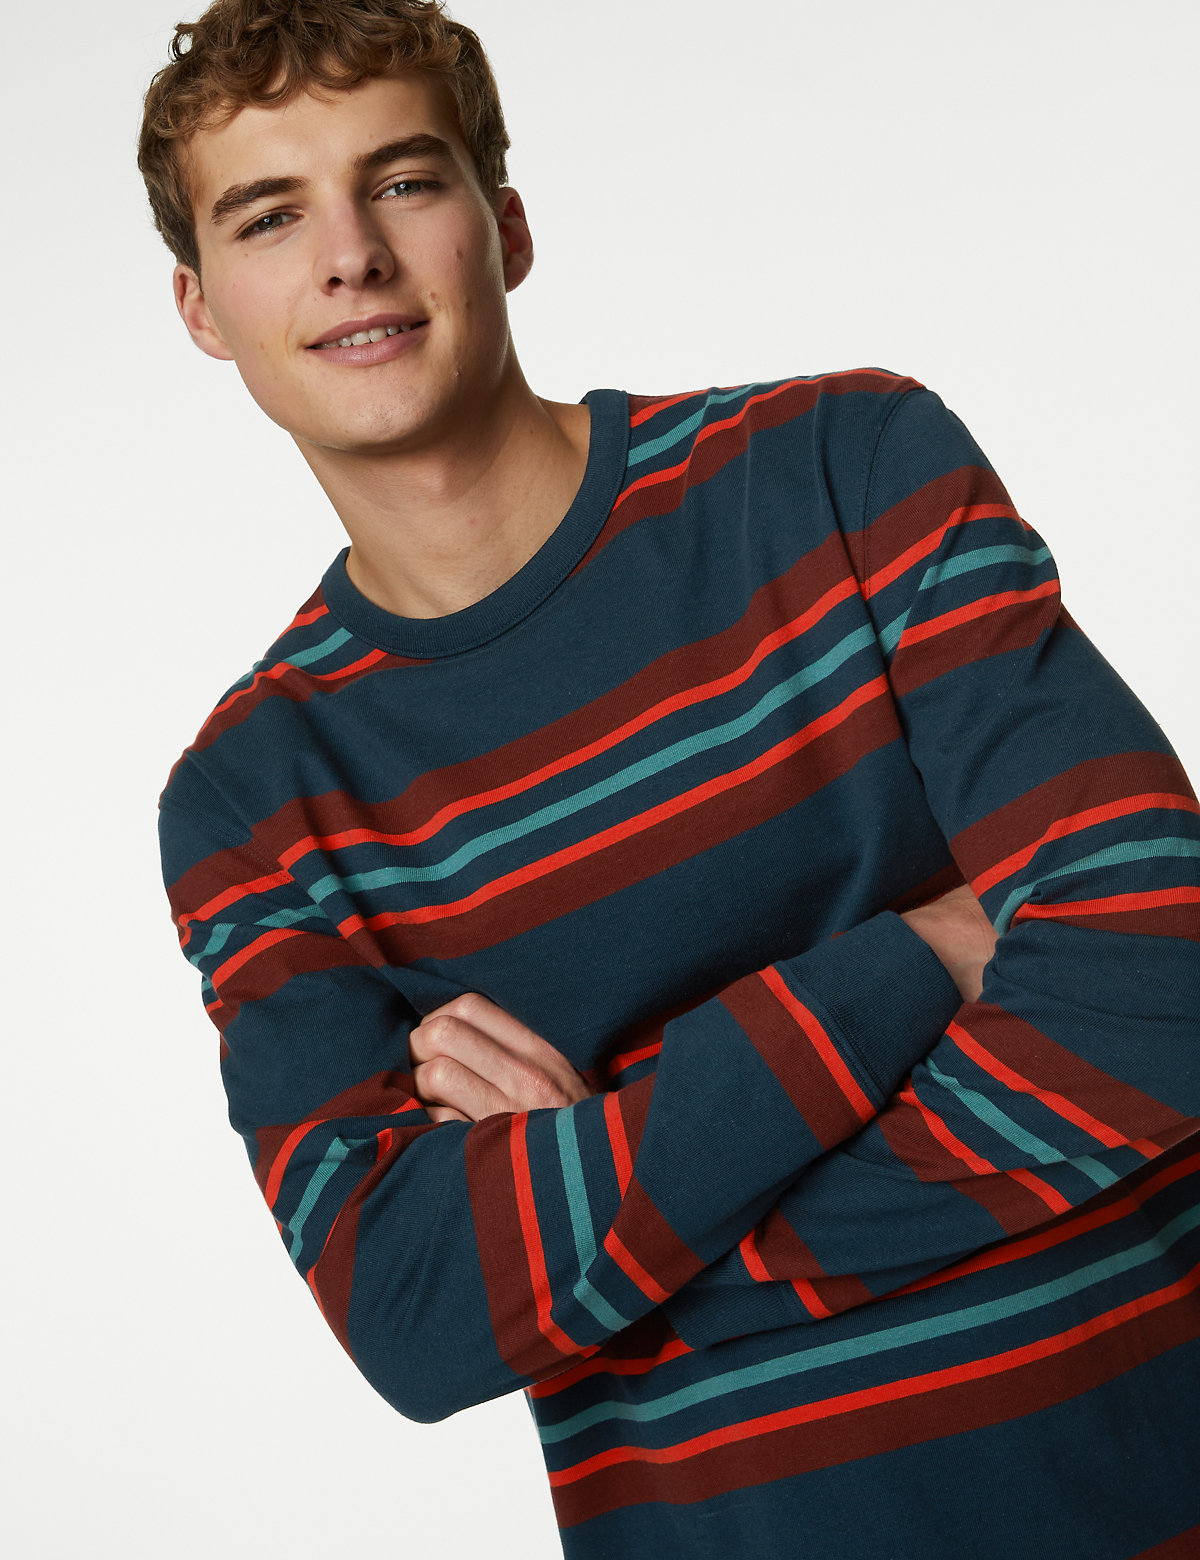 Pure Cotton Striped Long Sleeve T-Shirt